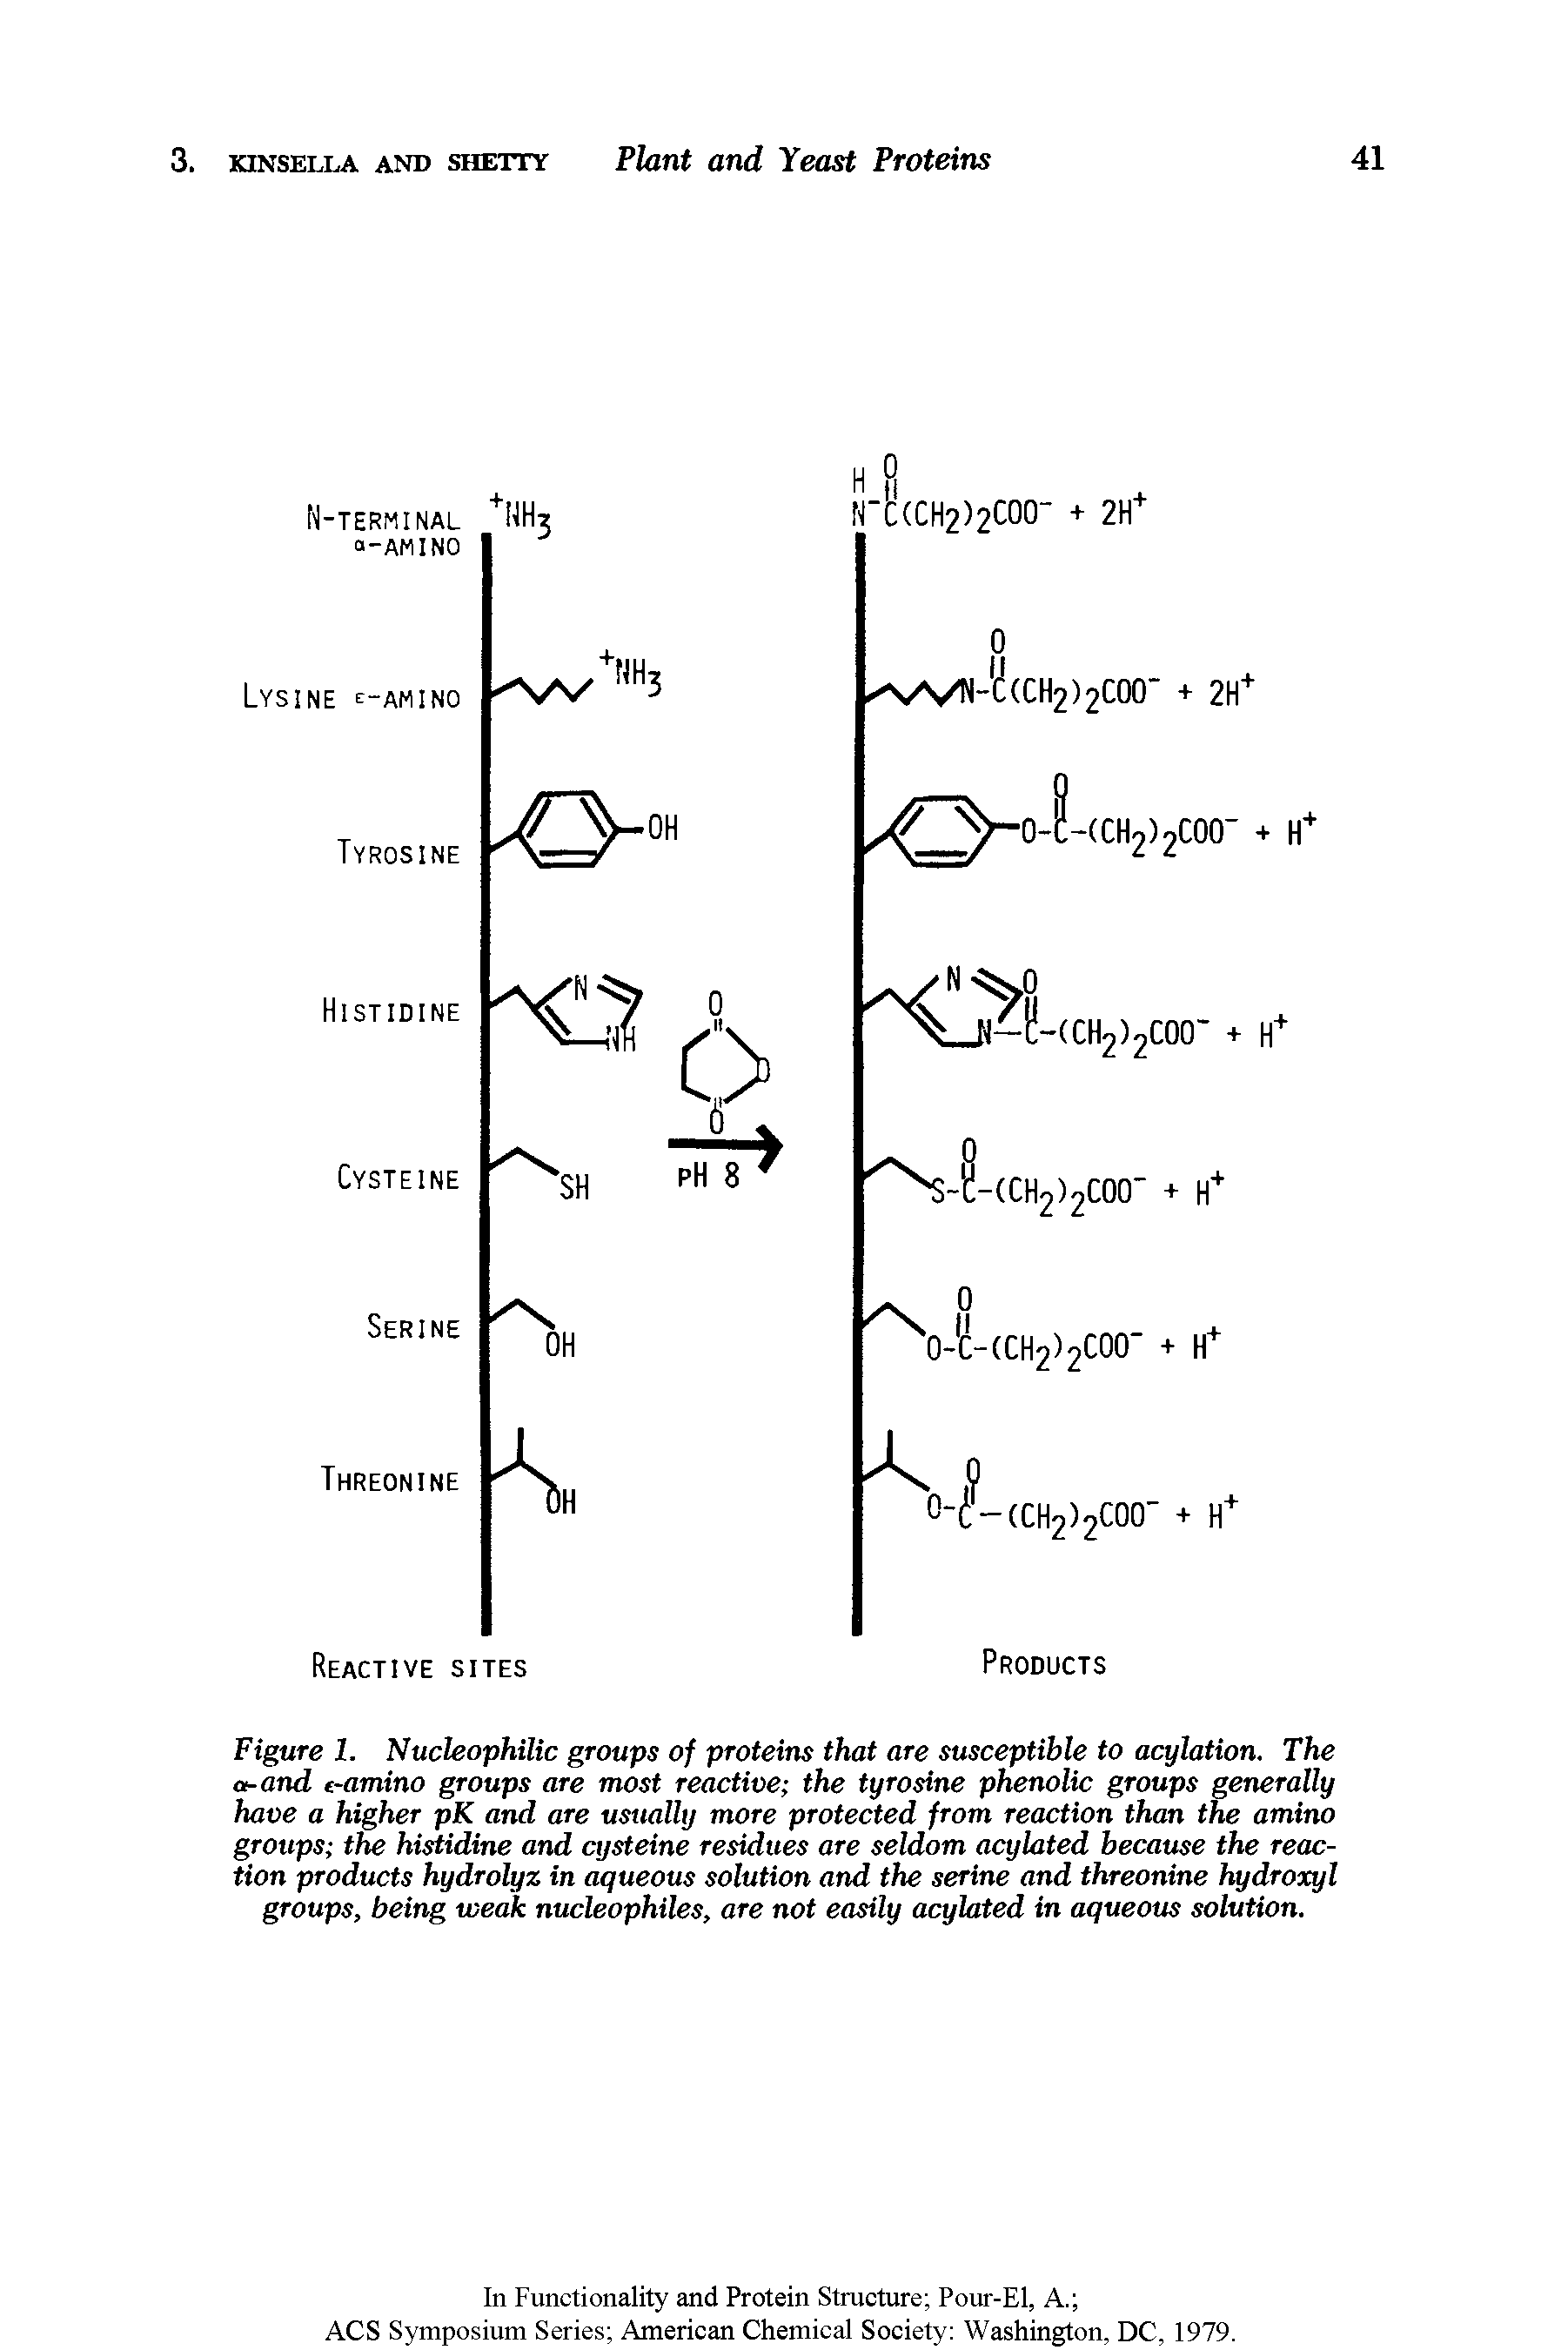 Figure 1. Nucleophilic groups of proteins that are susceptible to acylation. The a-and e-amino groups are most reactive the tyrosine phenolic groups generally have a higher pK and are usually more protected from reaction than the amino groups the histidine and cysteine residues are seldom acylated because the reaction products hydrolyz in aqueous solution and the serine and threonine hydroxyl groups, being weak nucleophiles, are not easily acylated in aqueous solution.